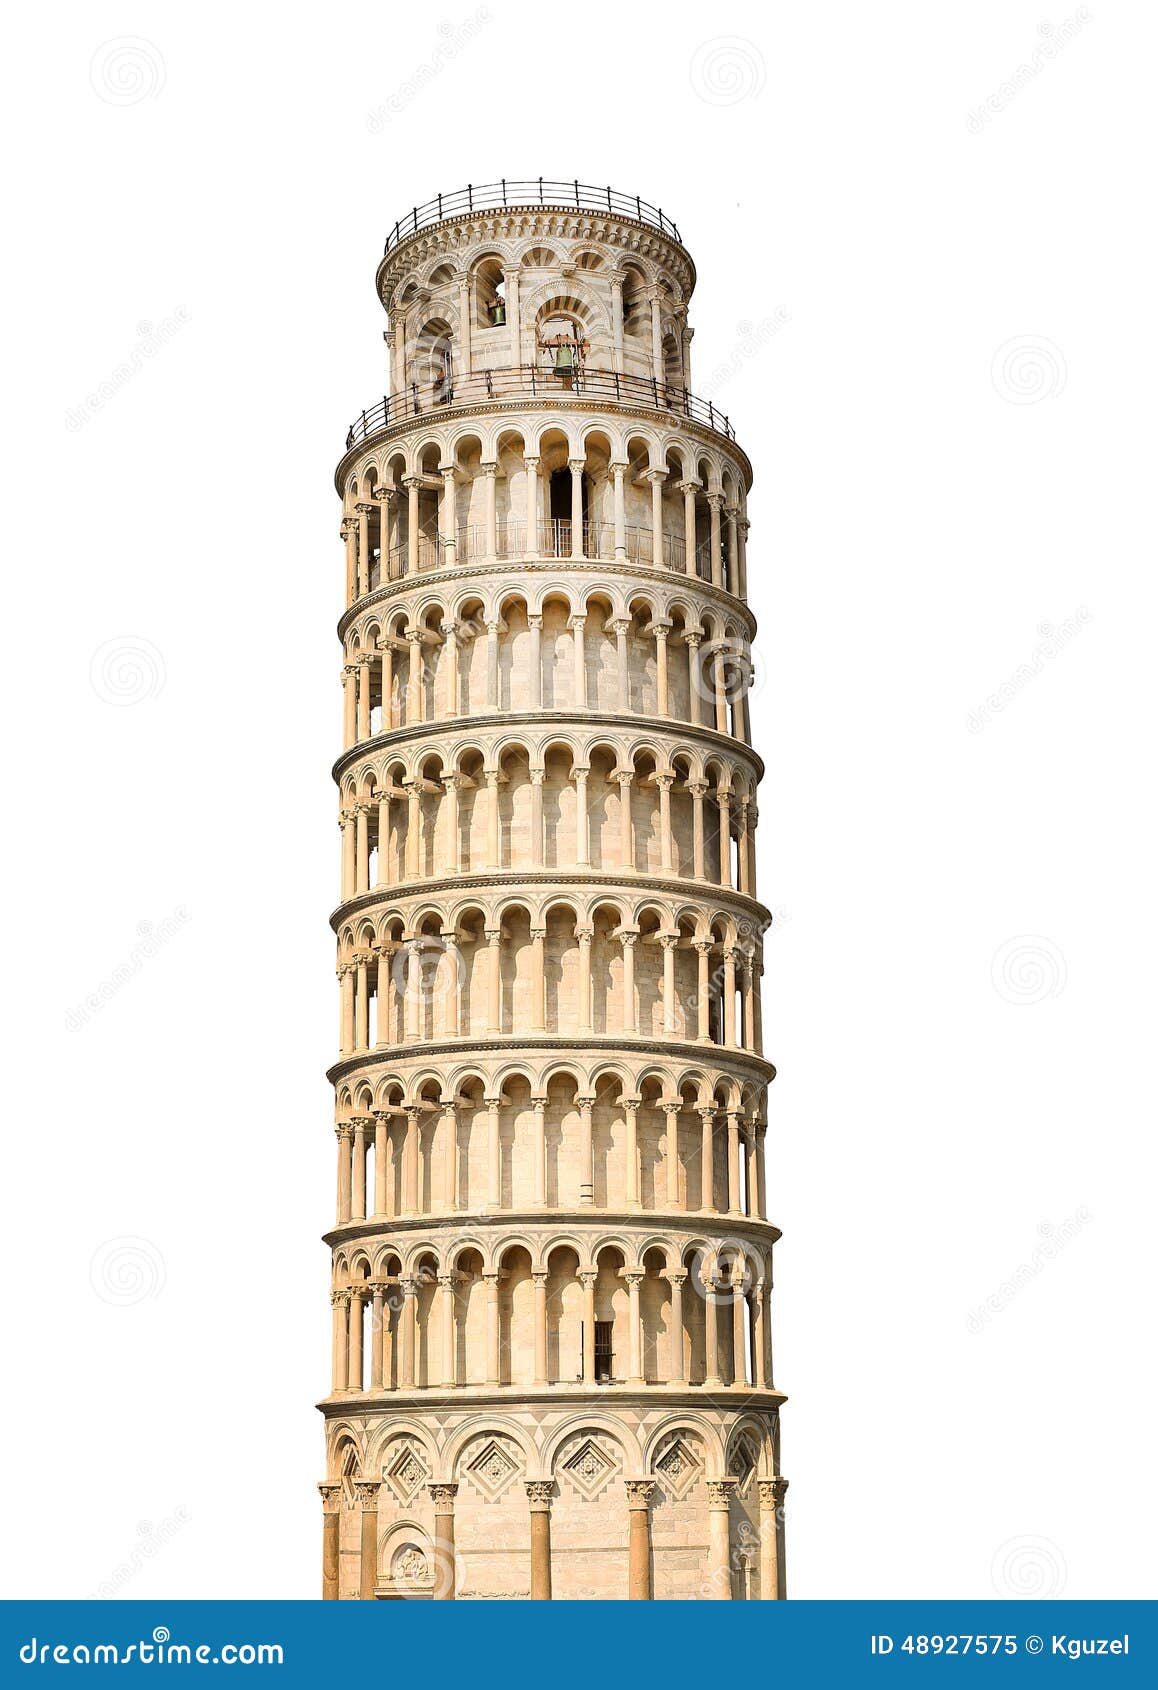 leaning tower of pisa. 